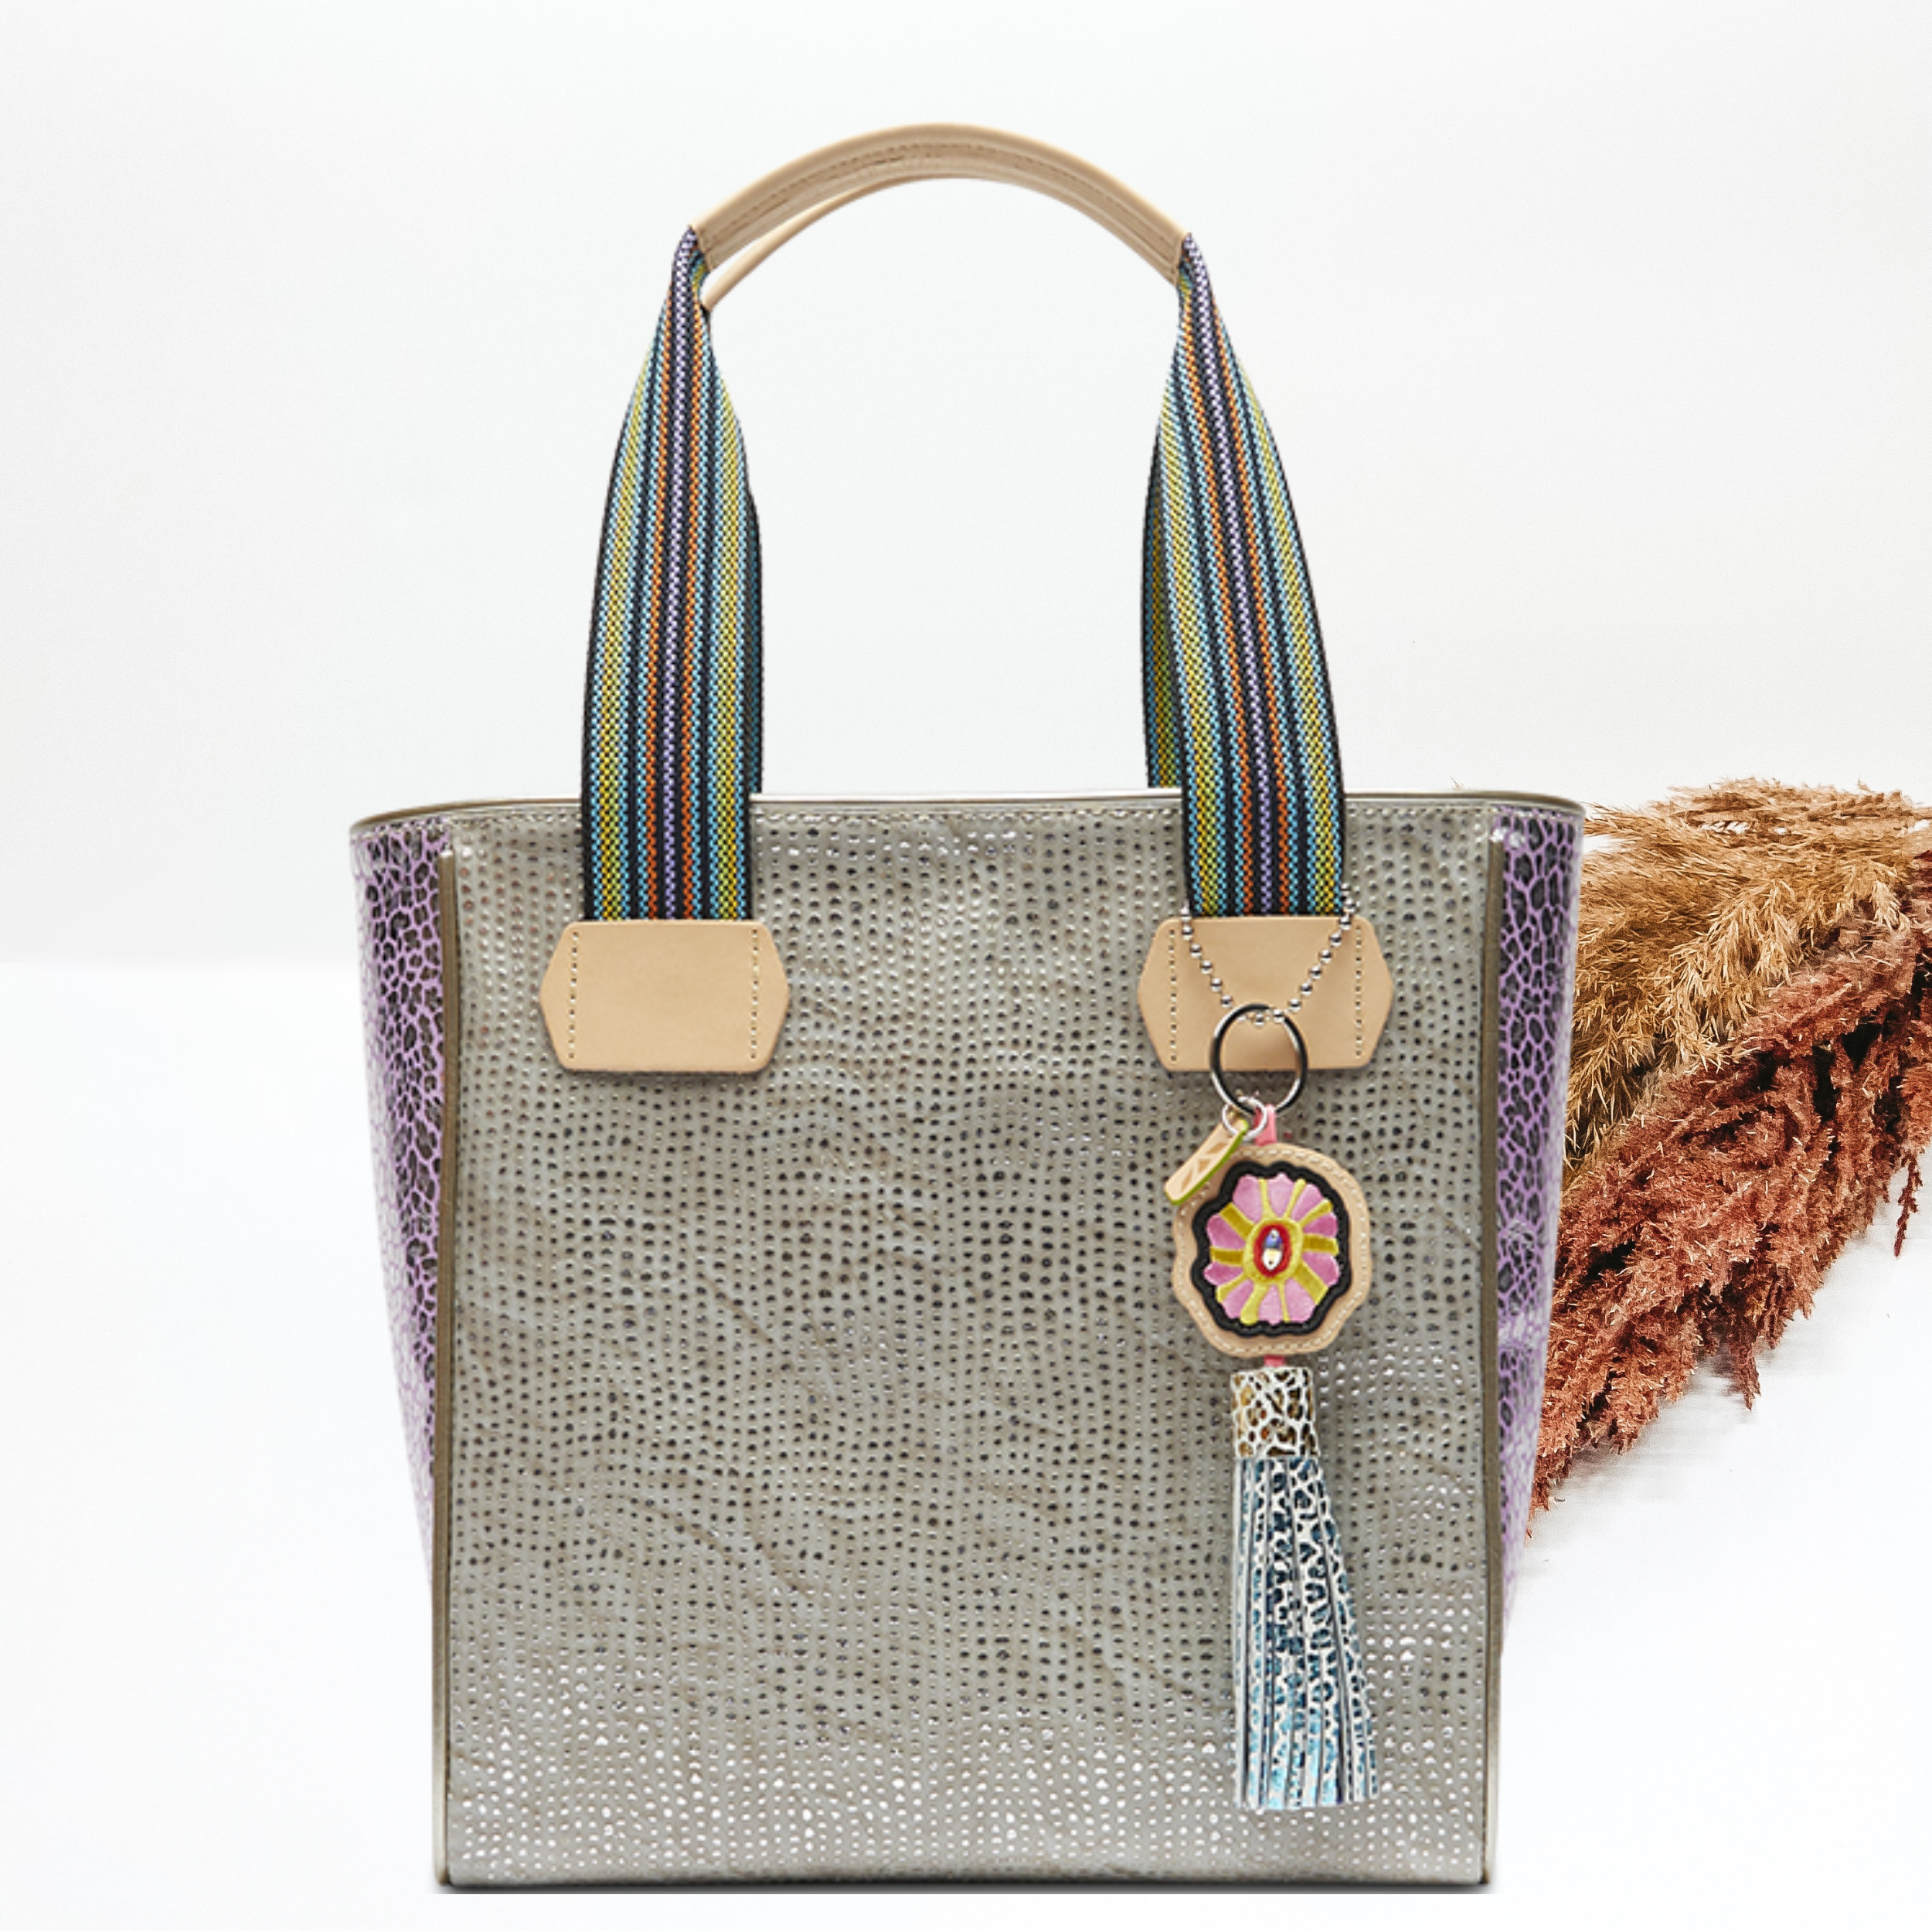 Pictured on a white background is a grey classic tote bag with woven straps and light tan handles. This bag includes a silver dotted print, purple leopard side panels, and a multicolored tassel charm. 